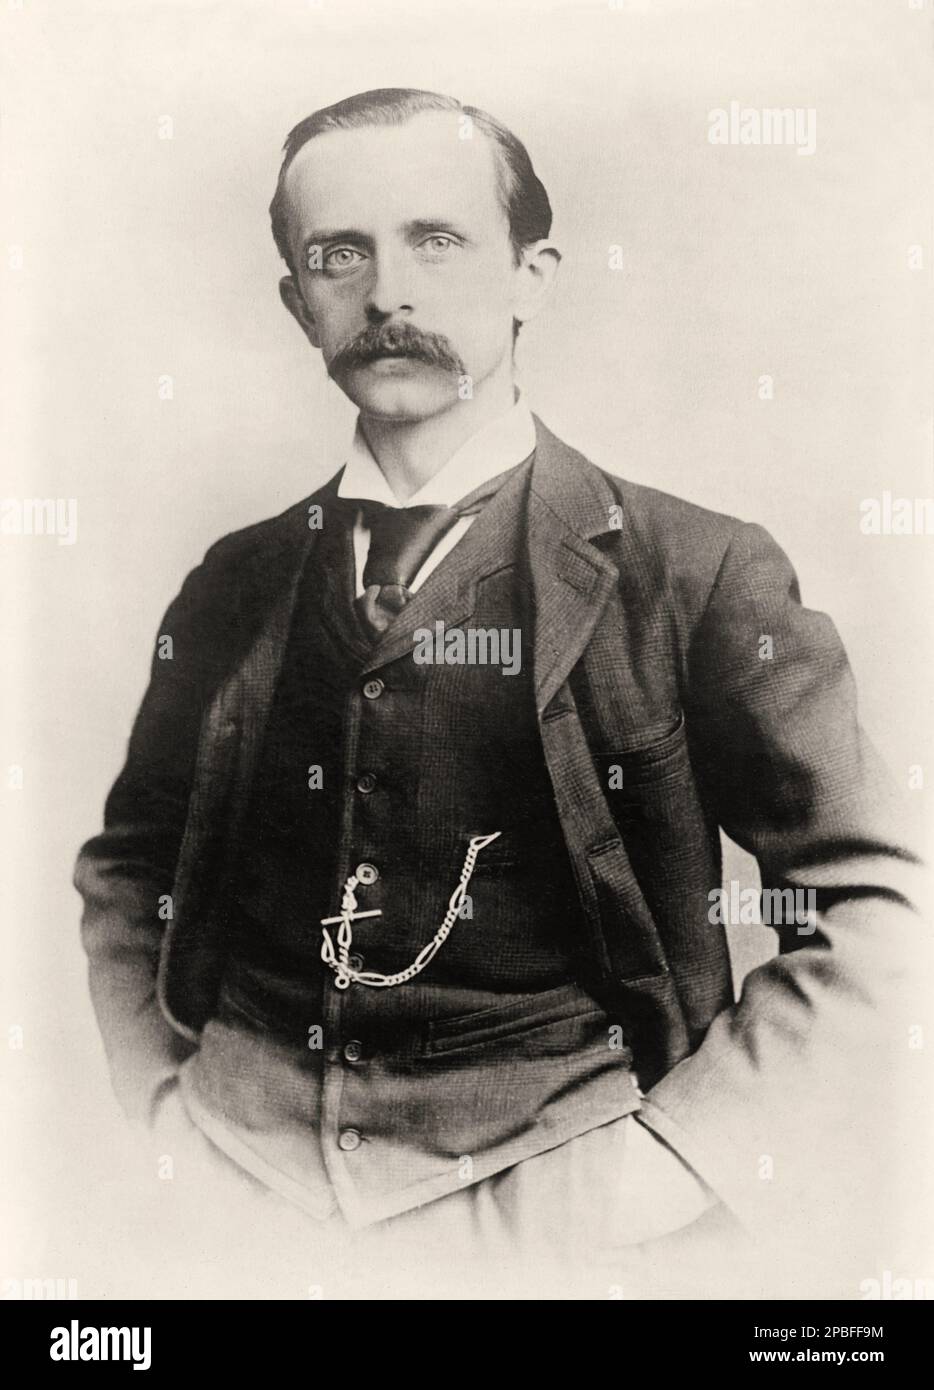 1895 ca, GREAT BRITAIN : Sir James Matthew Barrie, 1st Baronet OM ( 1860 –  1937 ), more commonly known as  J. M. Barrie , was a Scottish novelist and dramatist. He is best remembered for creating PETER PAN, the boy who refused to grow up, whom he based on his friends, the Llewelyn Davies boys. - TEATRO - portrait - ritratto  - DRAMMATURGO - PLAYWRITER  - TEATRO - THEATRE - THEATER - cravatta - tie - collar - colletto - baffi - moustache - SCRITTORE - WRITER - LETTERATURA - LITERATURE ----  Archivio GBB Stock Photo